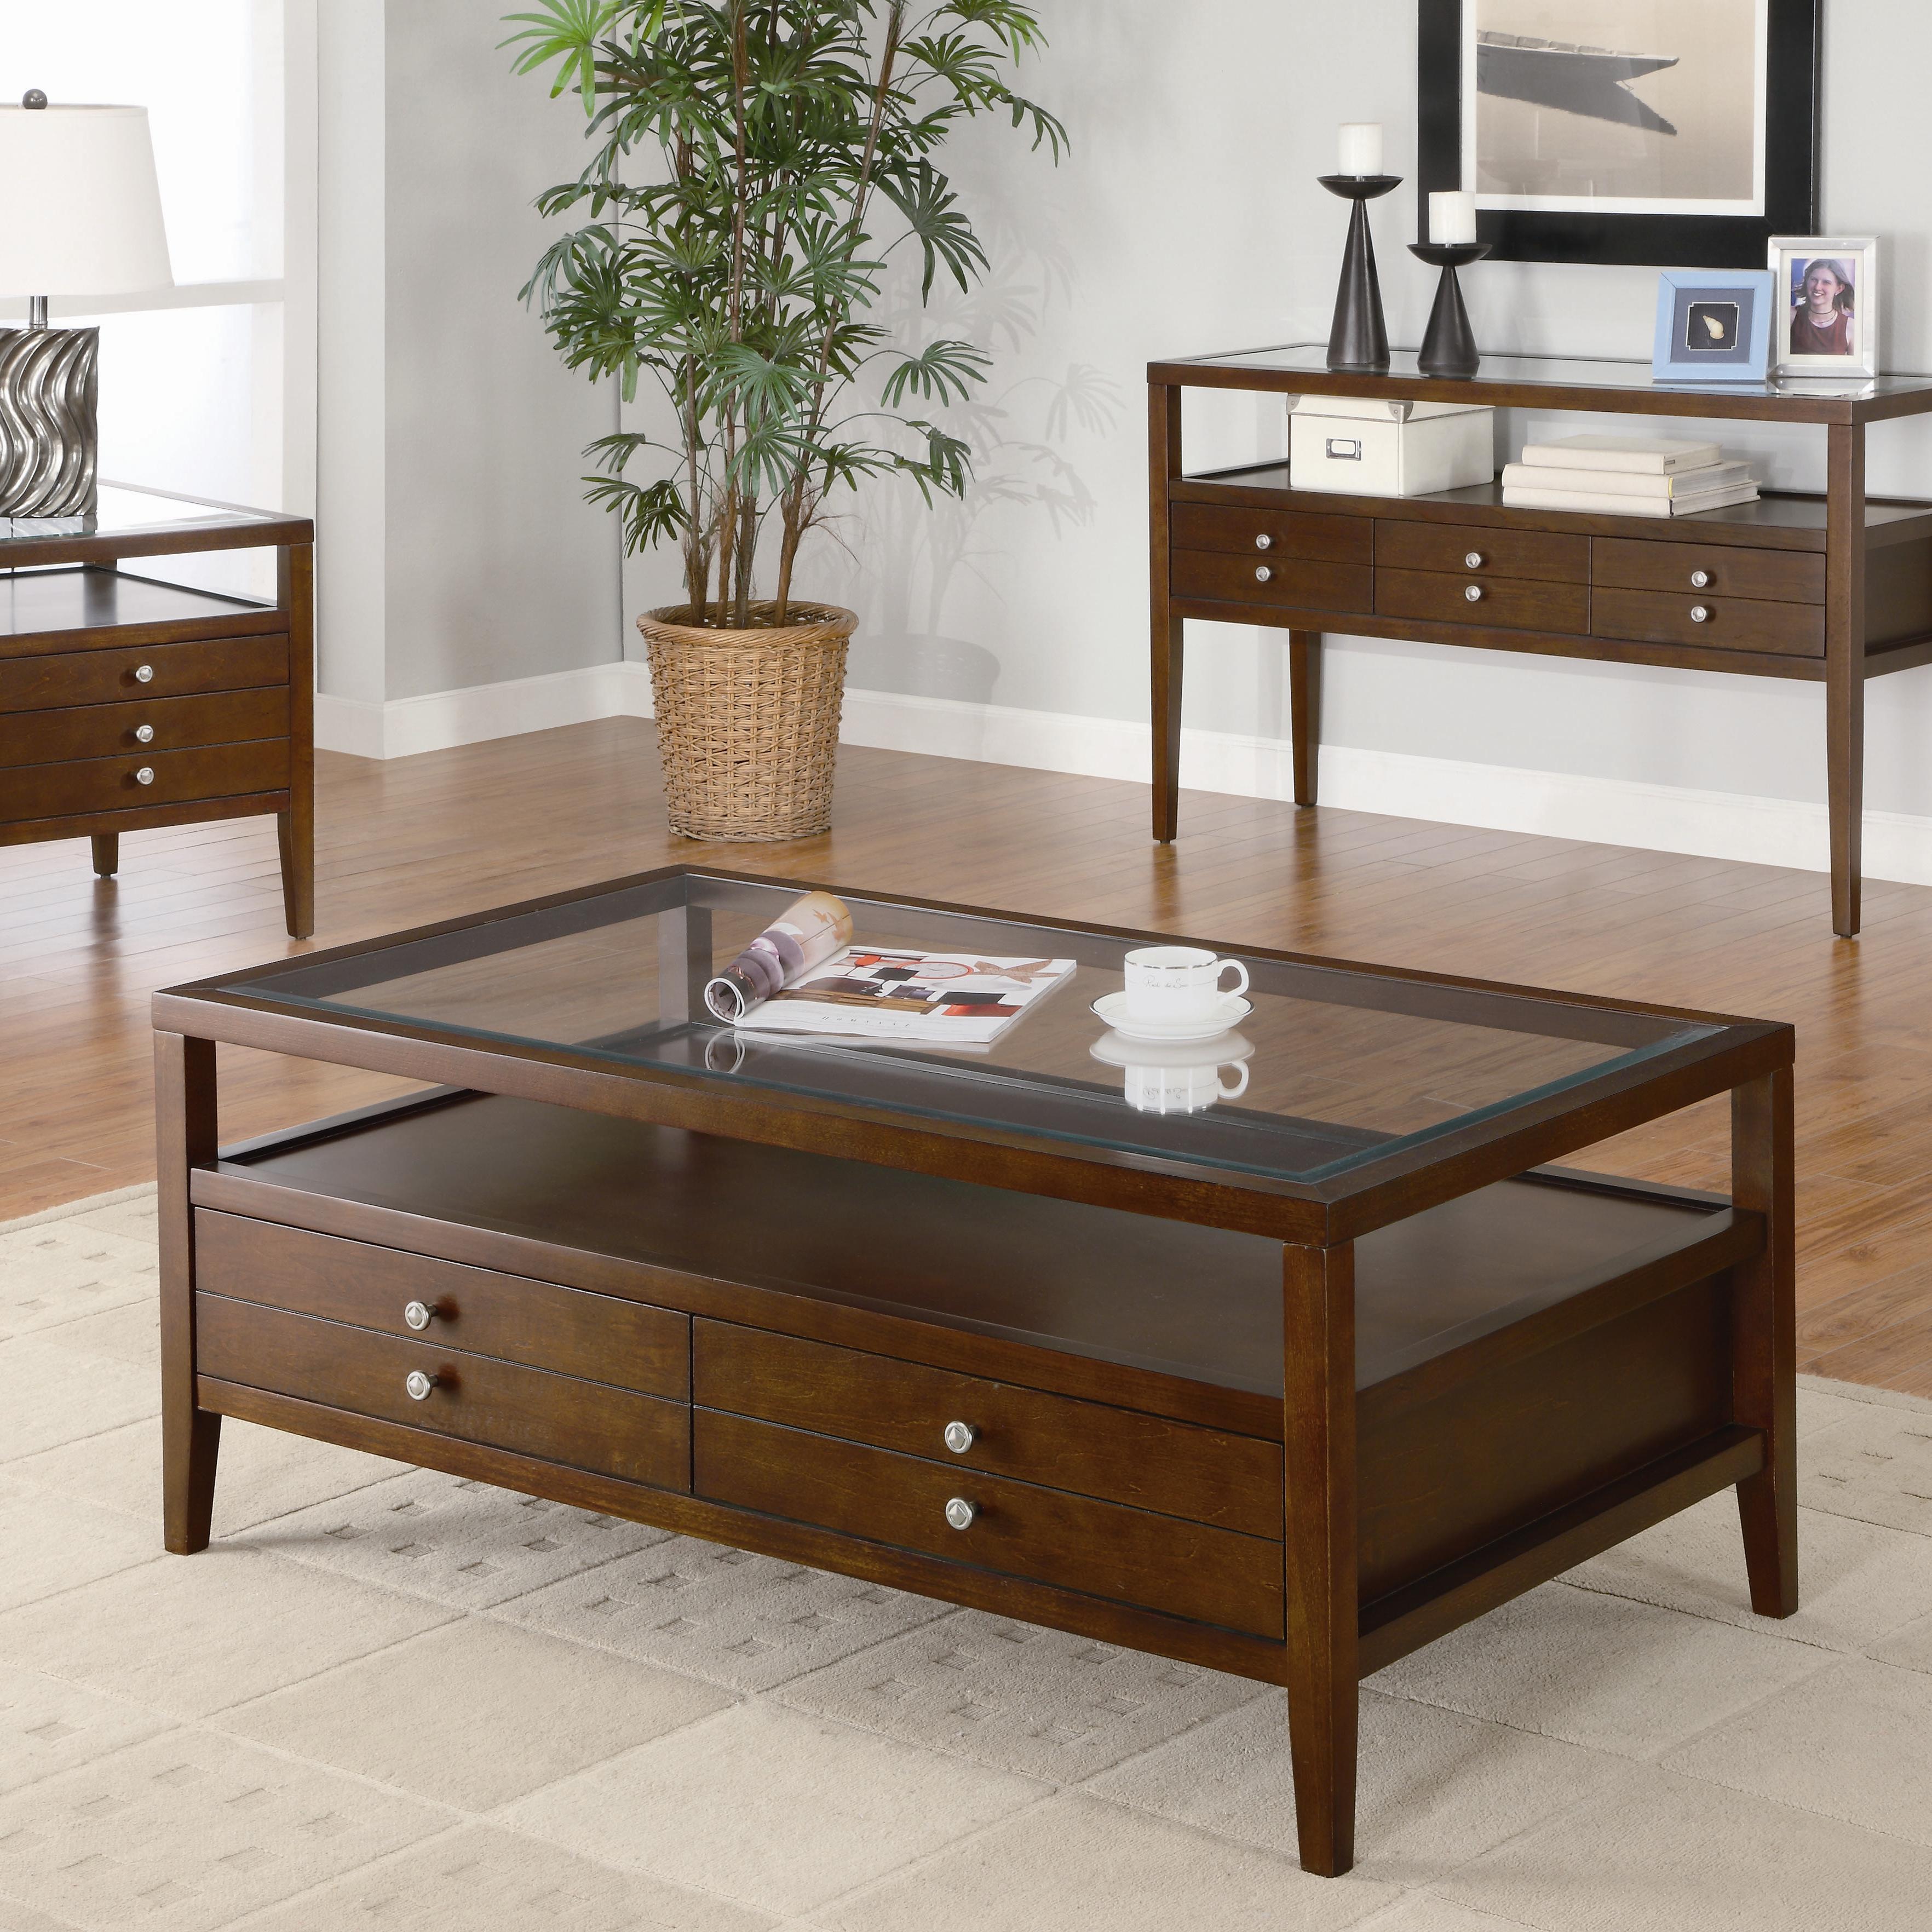 Elegant Coffee Table With Shelf And Drawers Idea